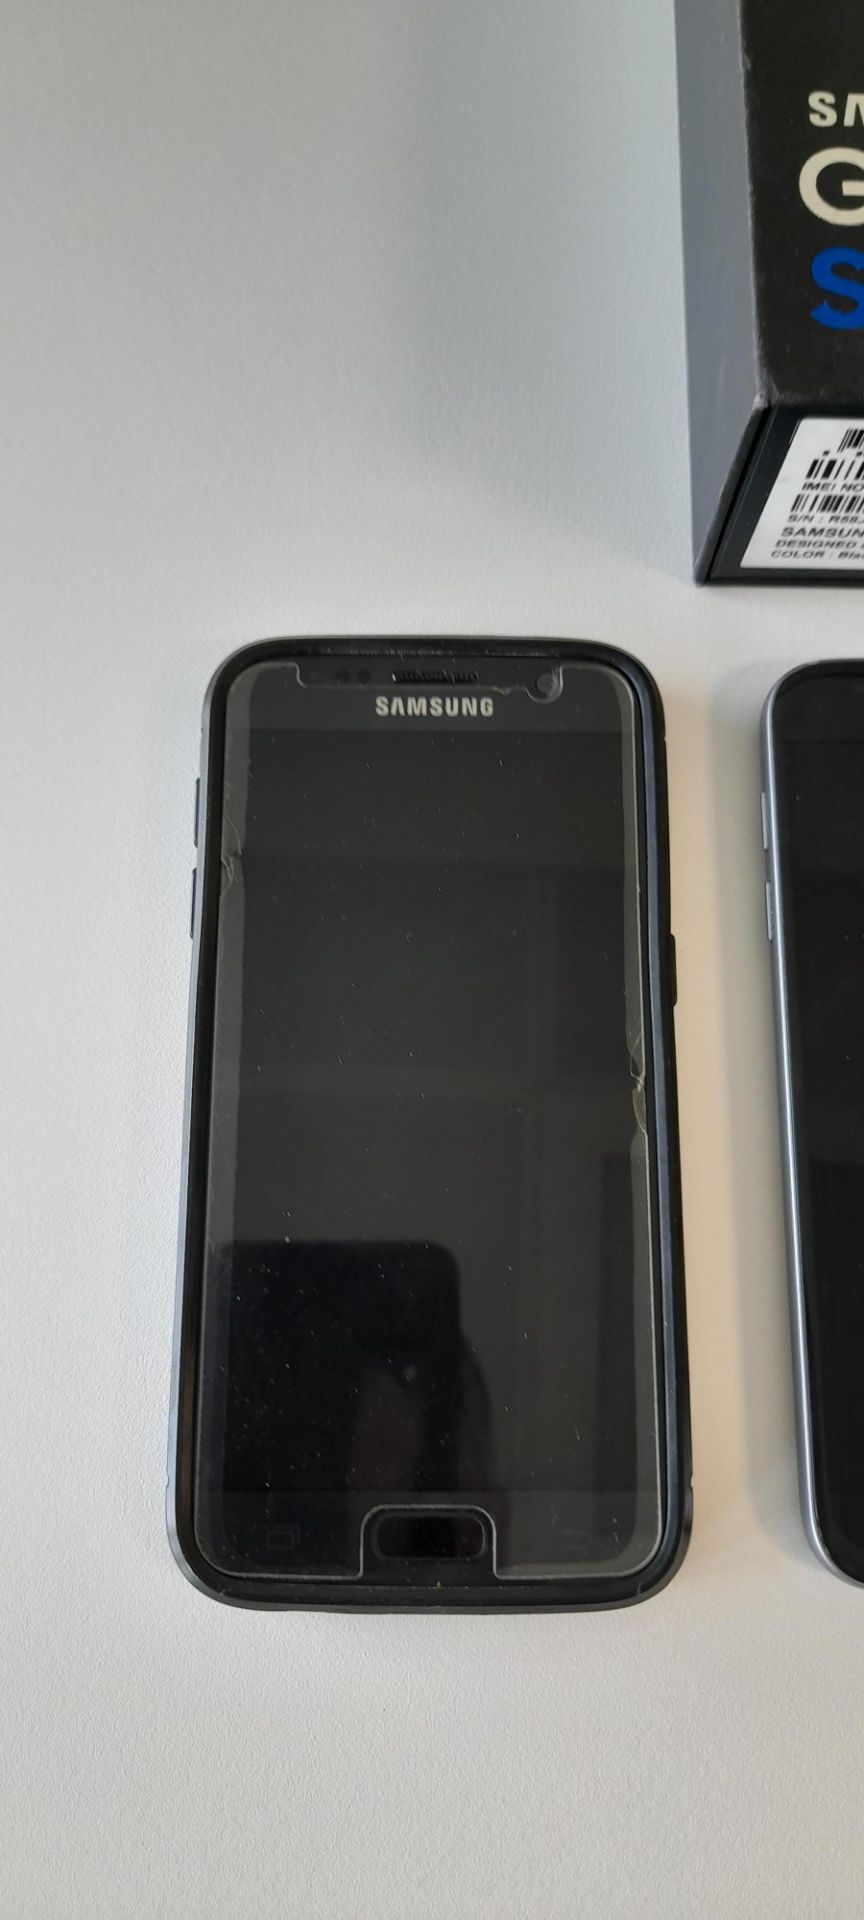 3x Samsung Galaxy S7, model SM-G930F. Collection from Canary Wharf, London, E14 - Image 2 of 8